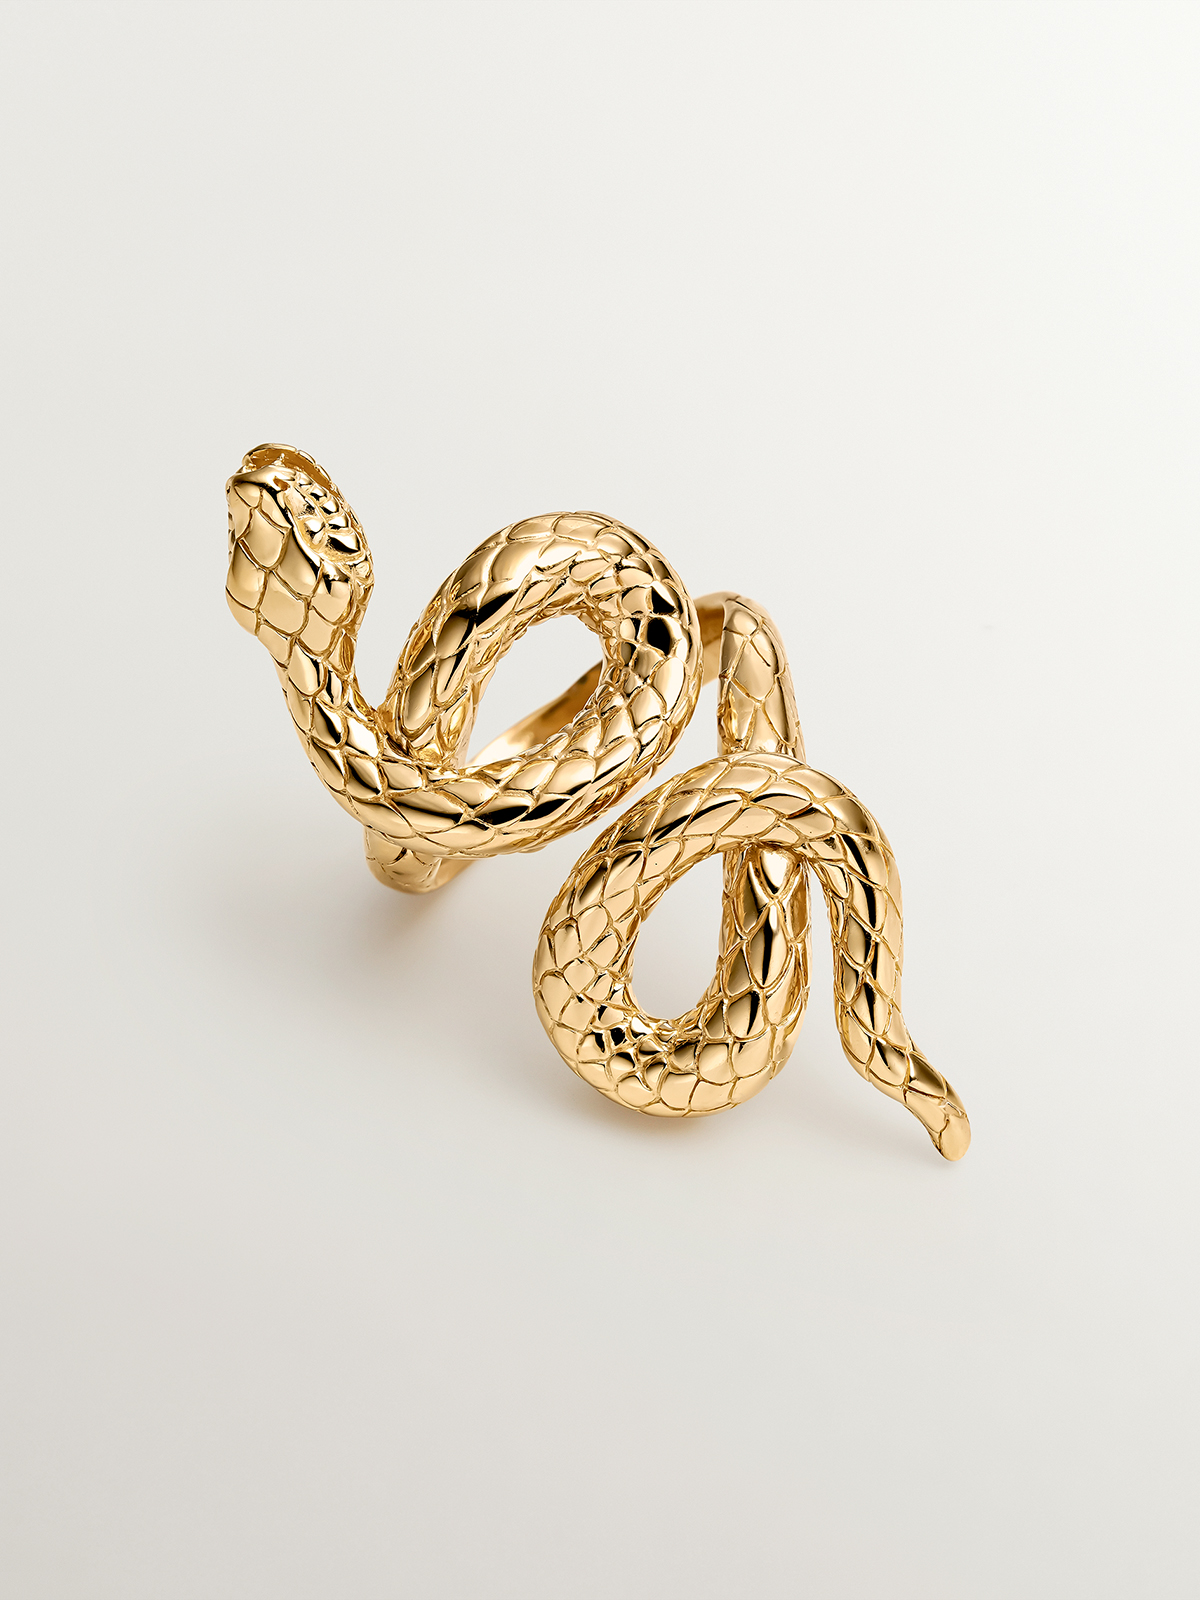 925 Silver Shuttle Ring, gold-plated in 18K Yellow Gold, with a Snake shape.